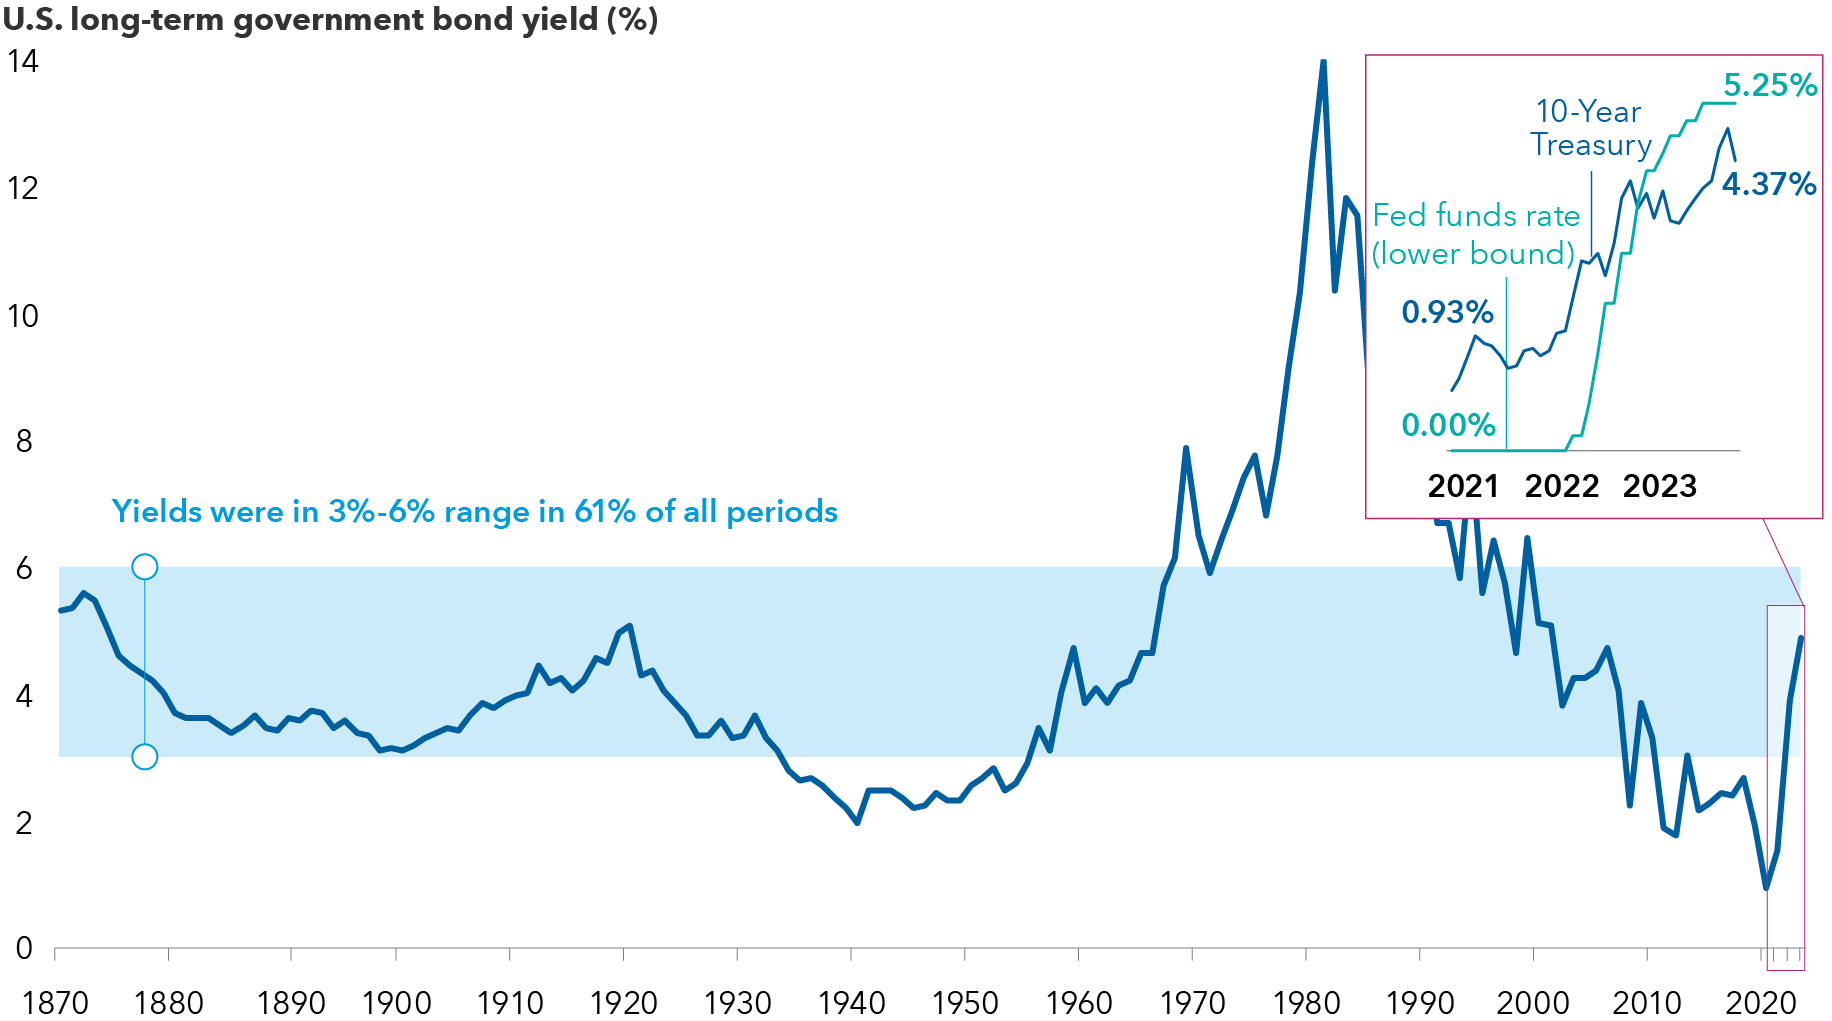 The image shows a line graph with long-term U.S. bond yields at decade intervals from 1870 to 2023 demonstrating that current rates are well within the historical average of 3% to 6% across 61% of the measured periods. In 1870, the 10-year Treasury yield was 5.32%. In 2020, during the COVID-19 pandemic, the 10-year yield was 0.93%. The image includes an inset line graph at annual intervals from 2021 through 2023, with the 10-year Treasury rate rising from 0.93% in 2021 to 4.37% in 2023, and the fed funds rate (lower bound) rising from 0.00% in 2021 to 5.25% in 2023.